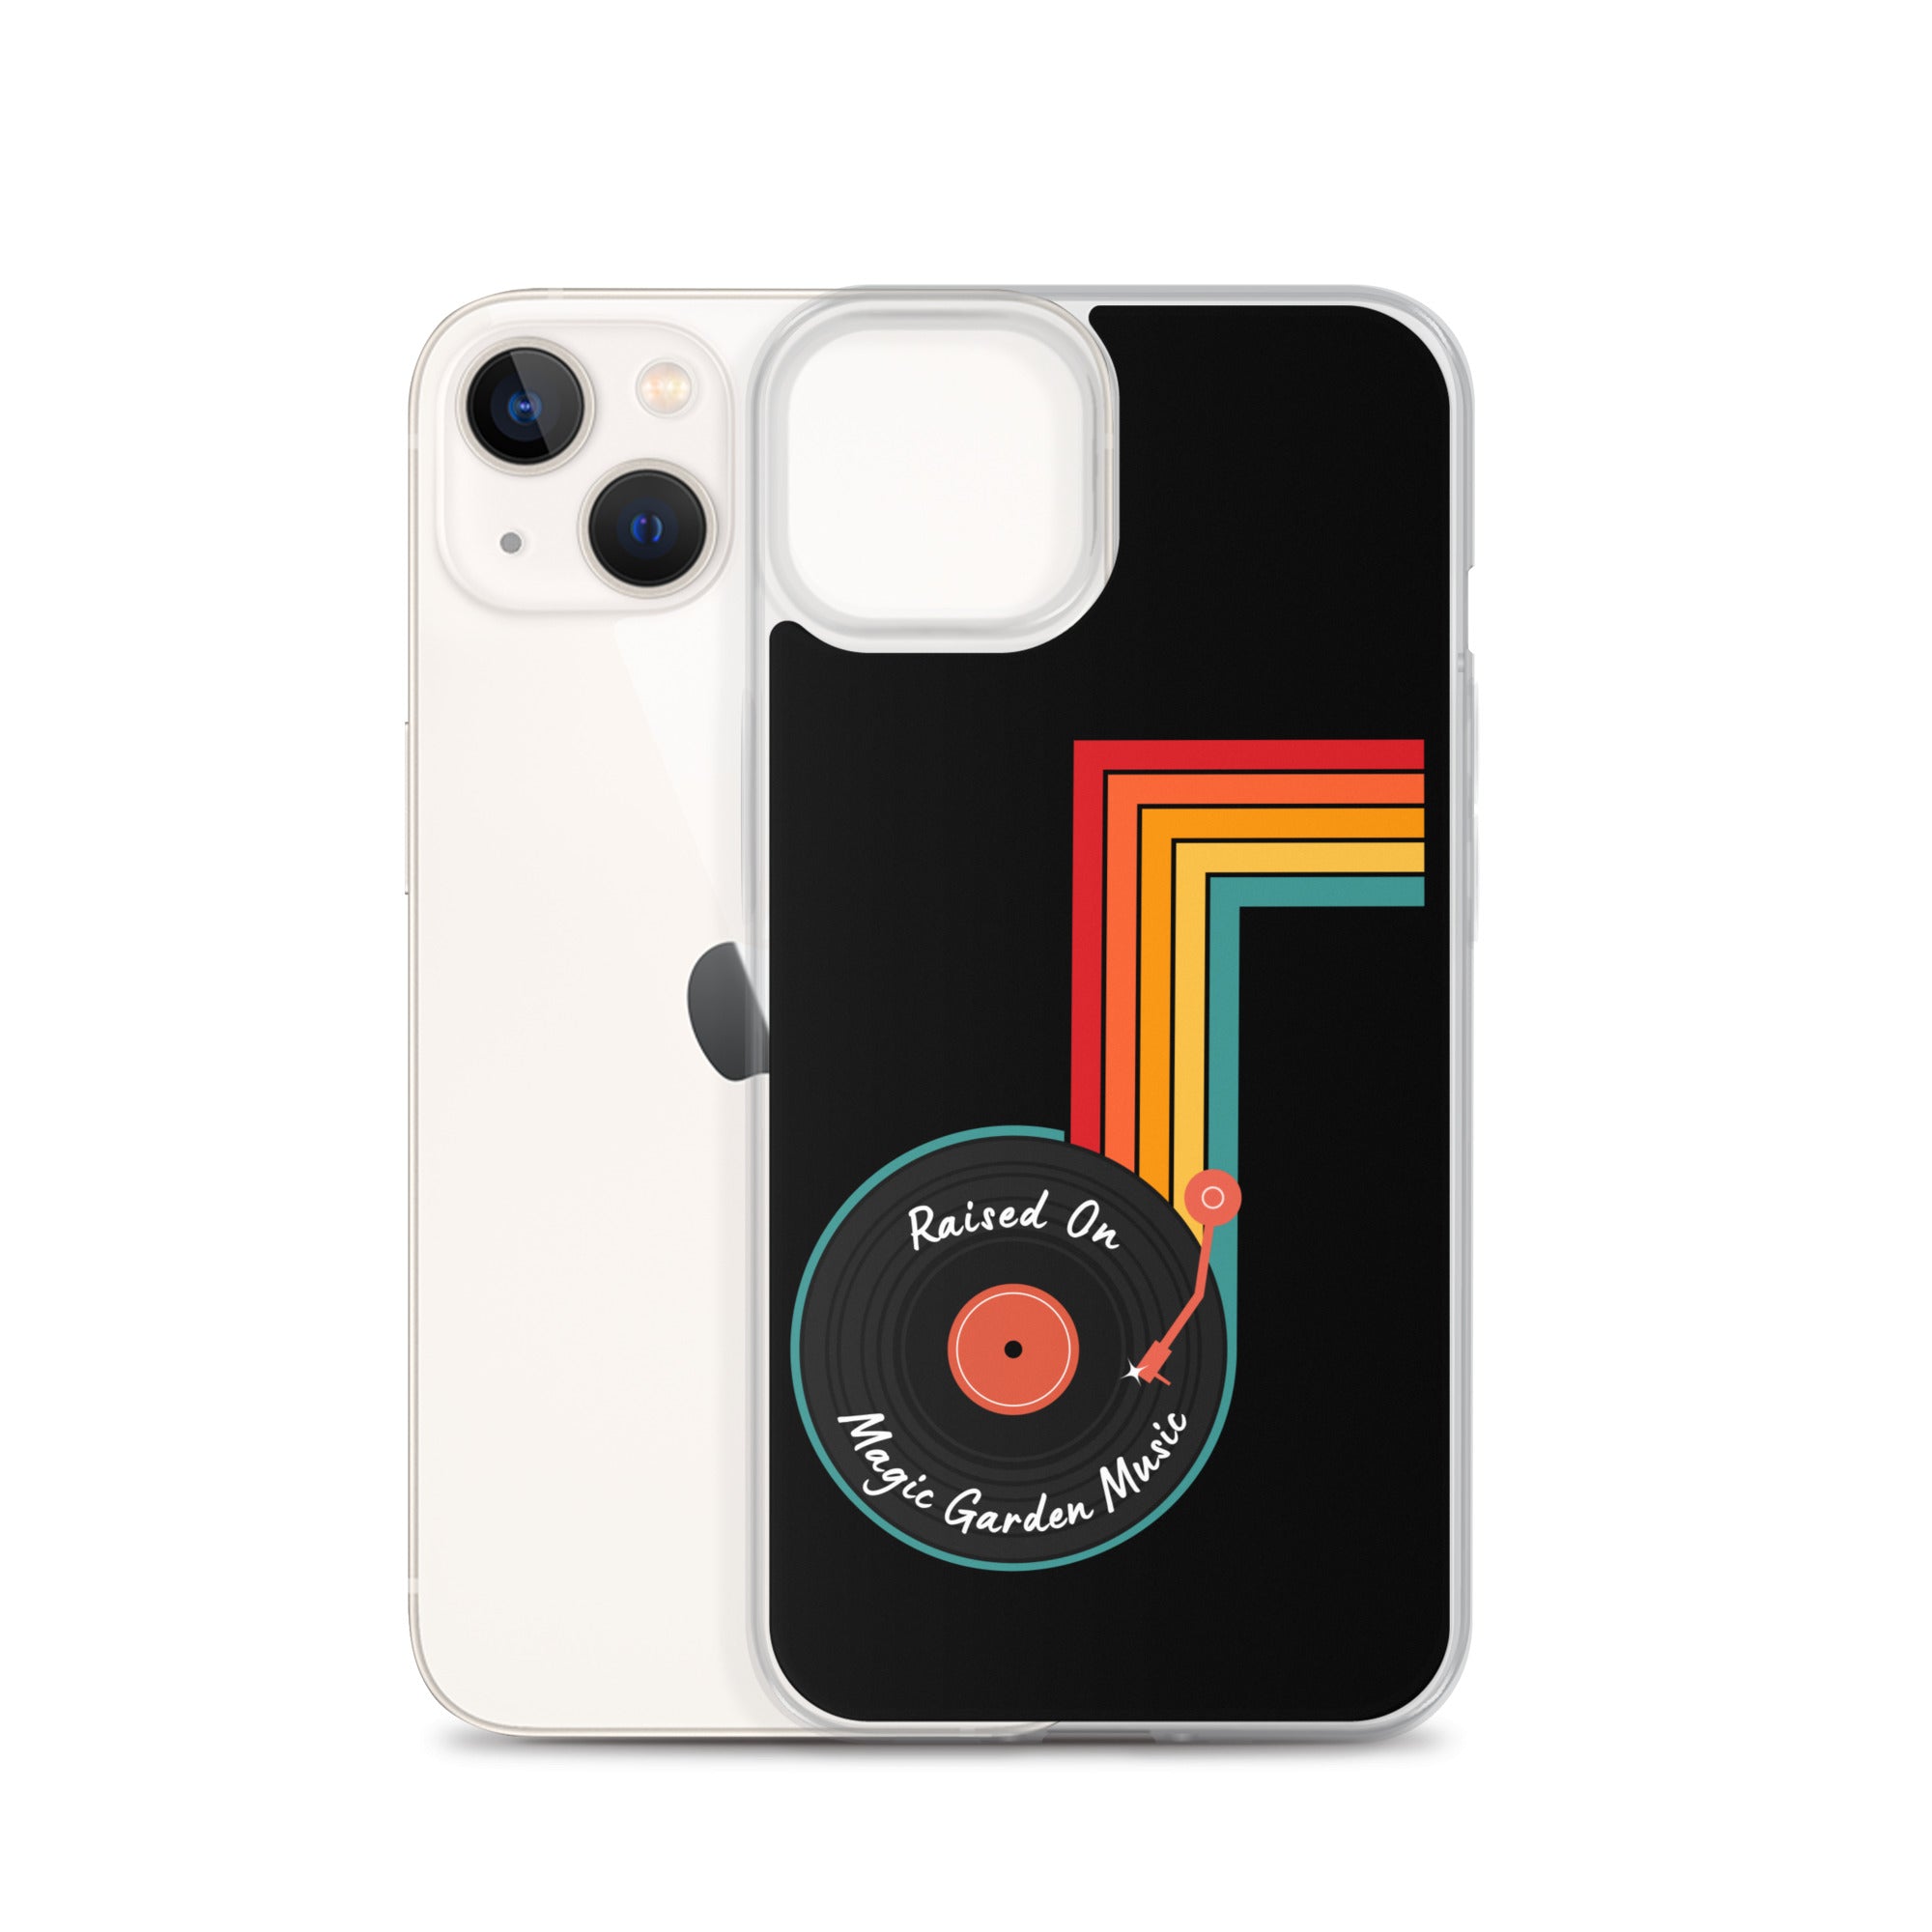 Raised On MG Music iPhone Cover, Black